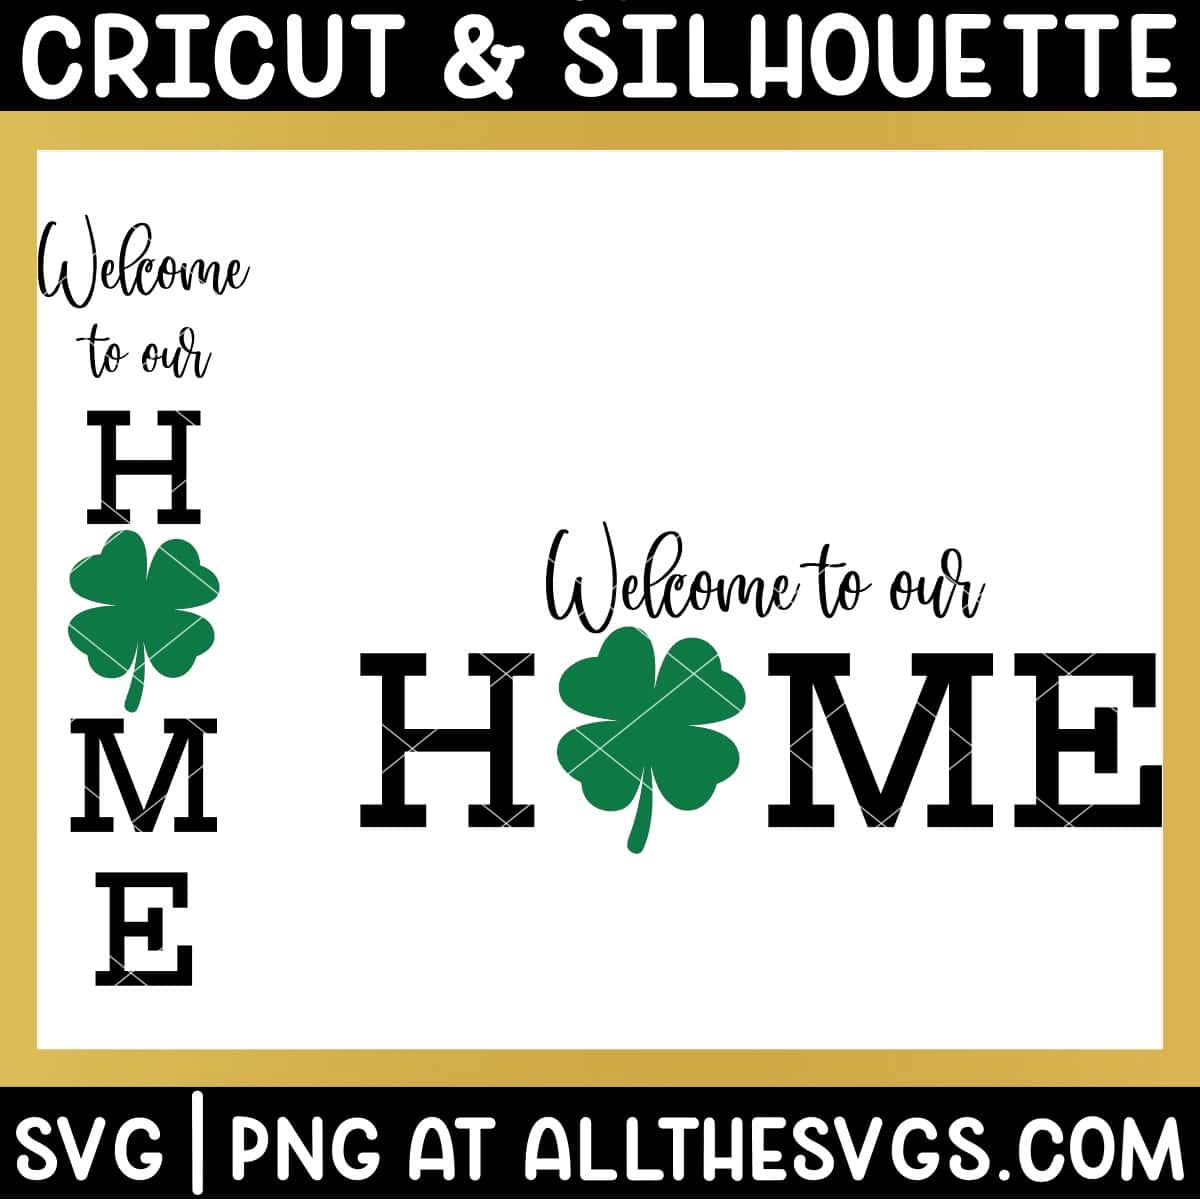 welcome to our home sign svg file with shamrock.